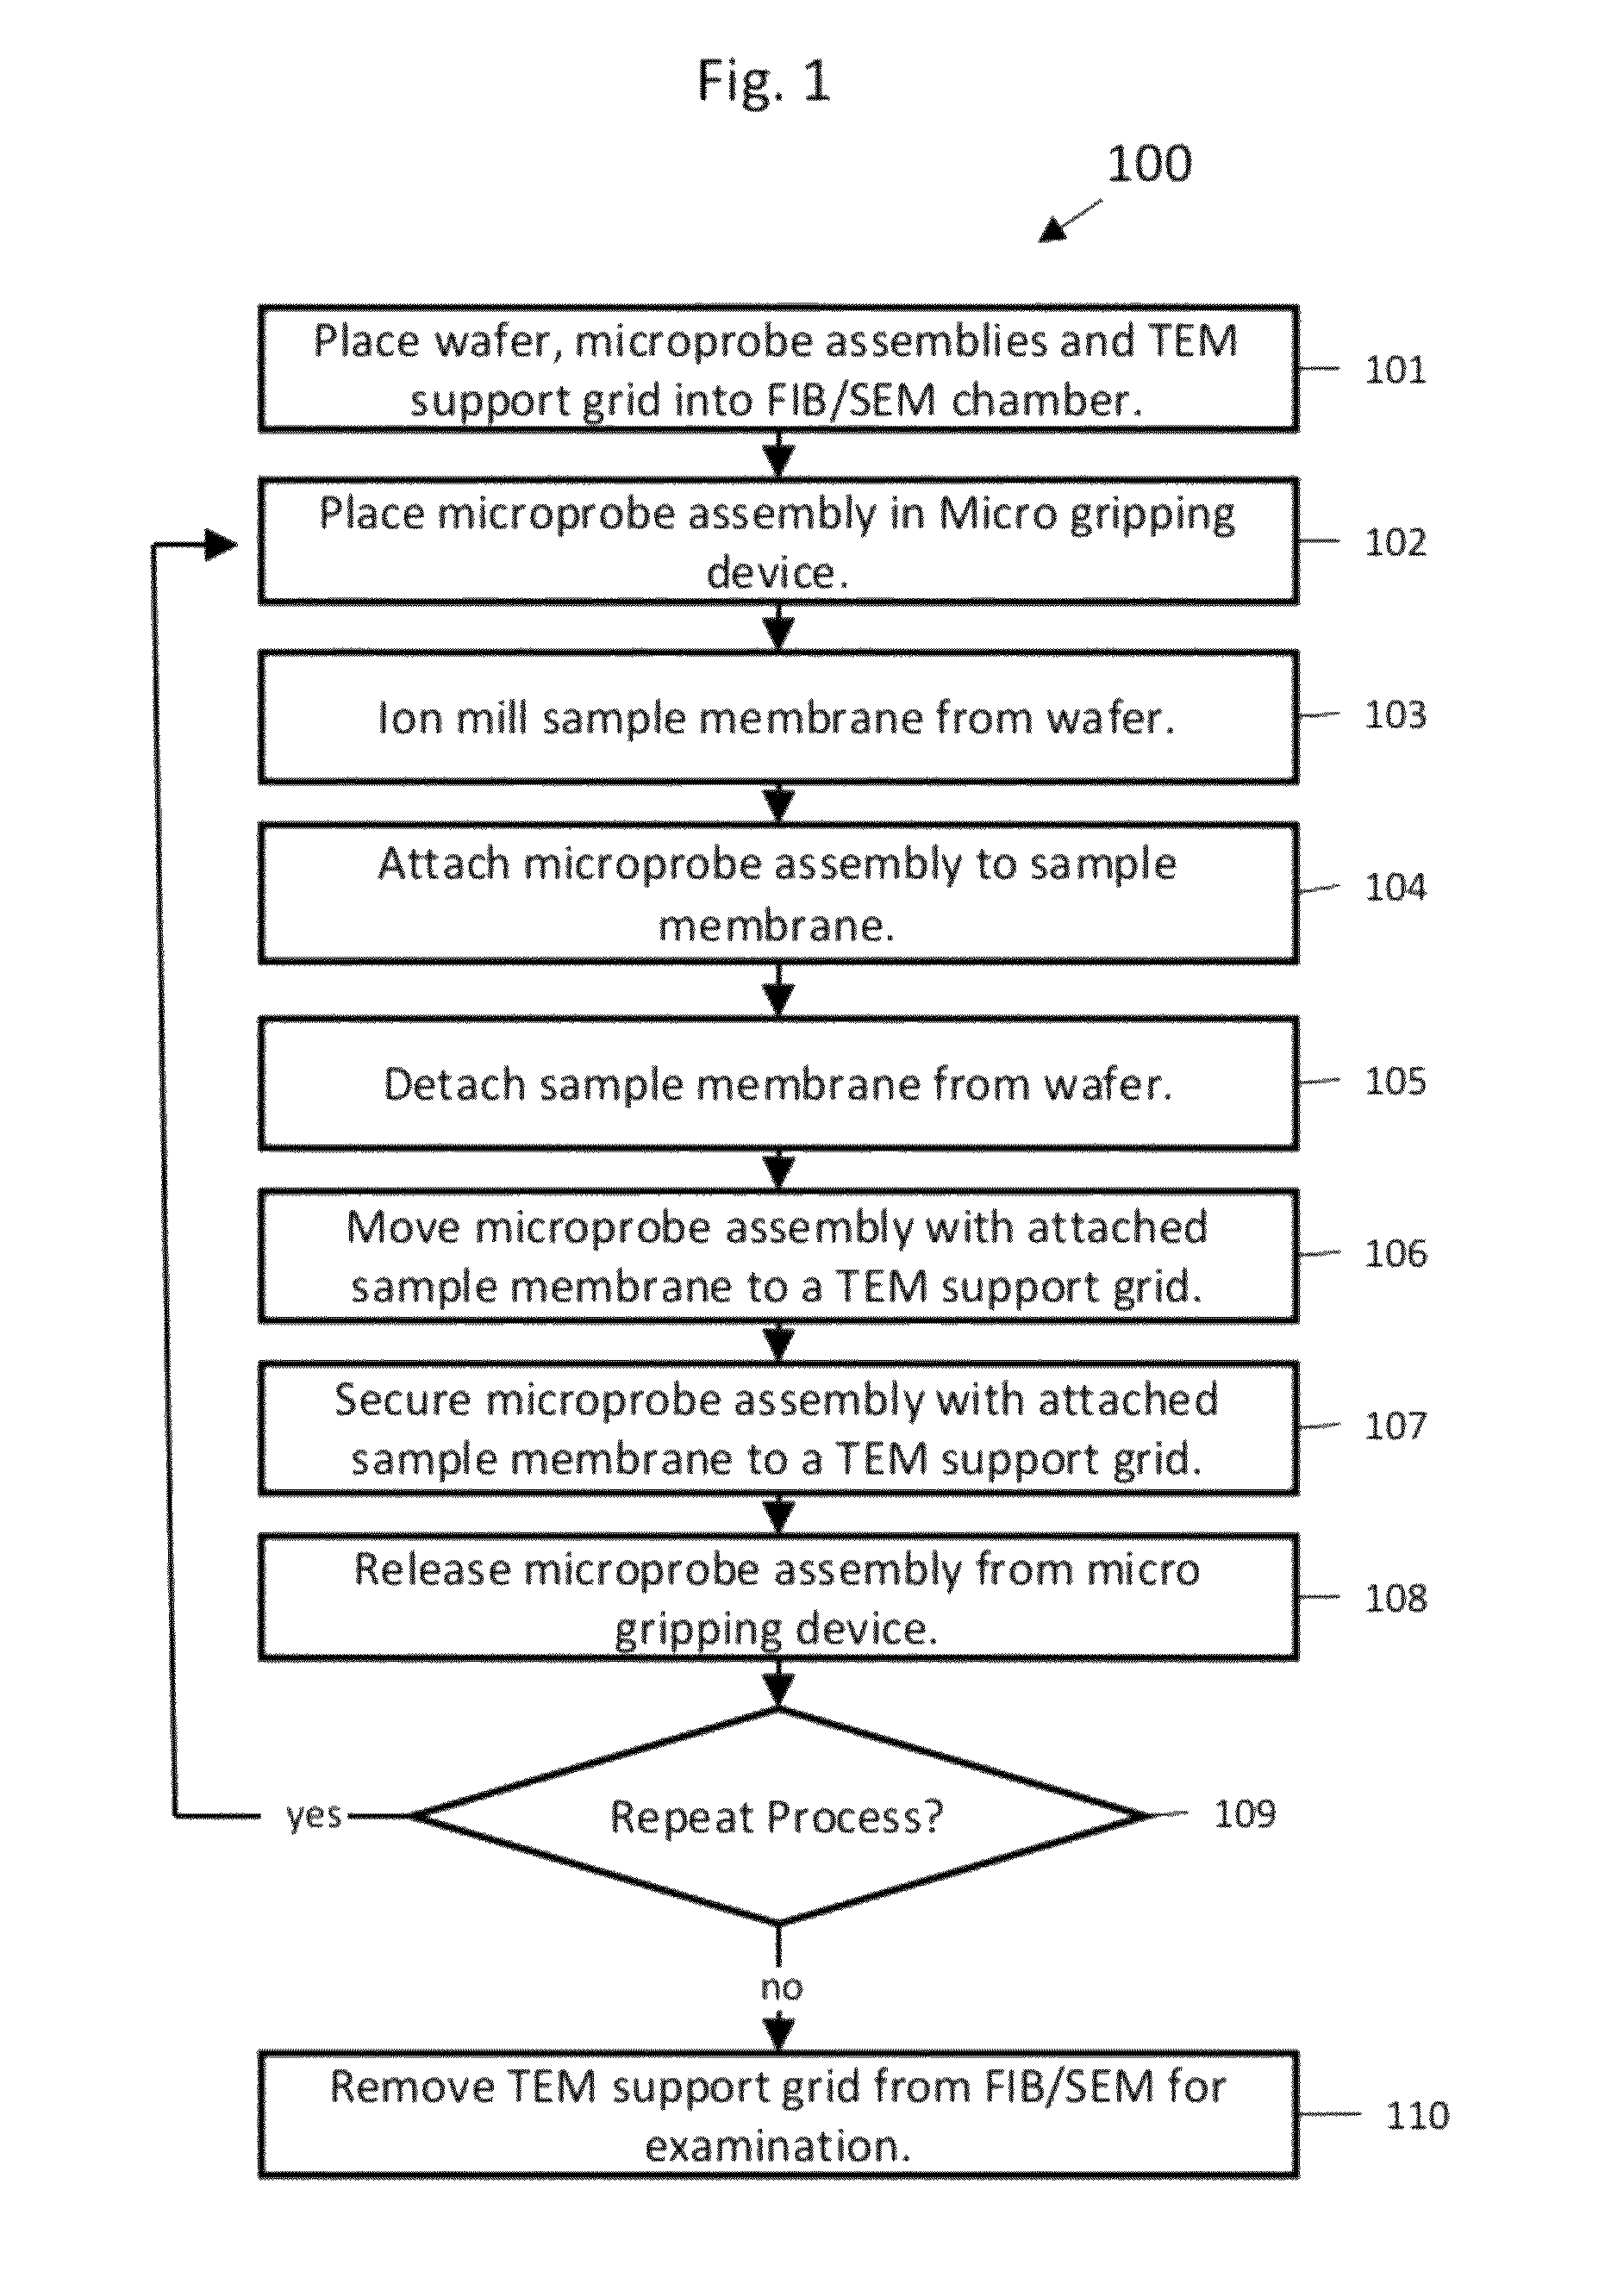 Method and apparatus for rapid preparation of multiple specimens for transmission electron microscopy